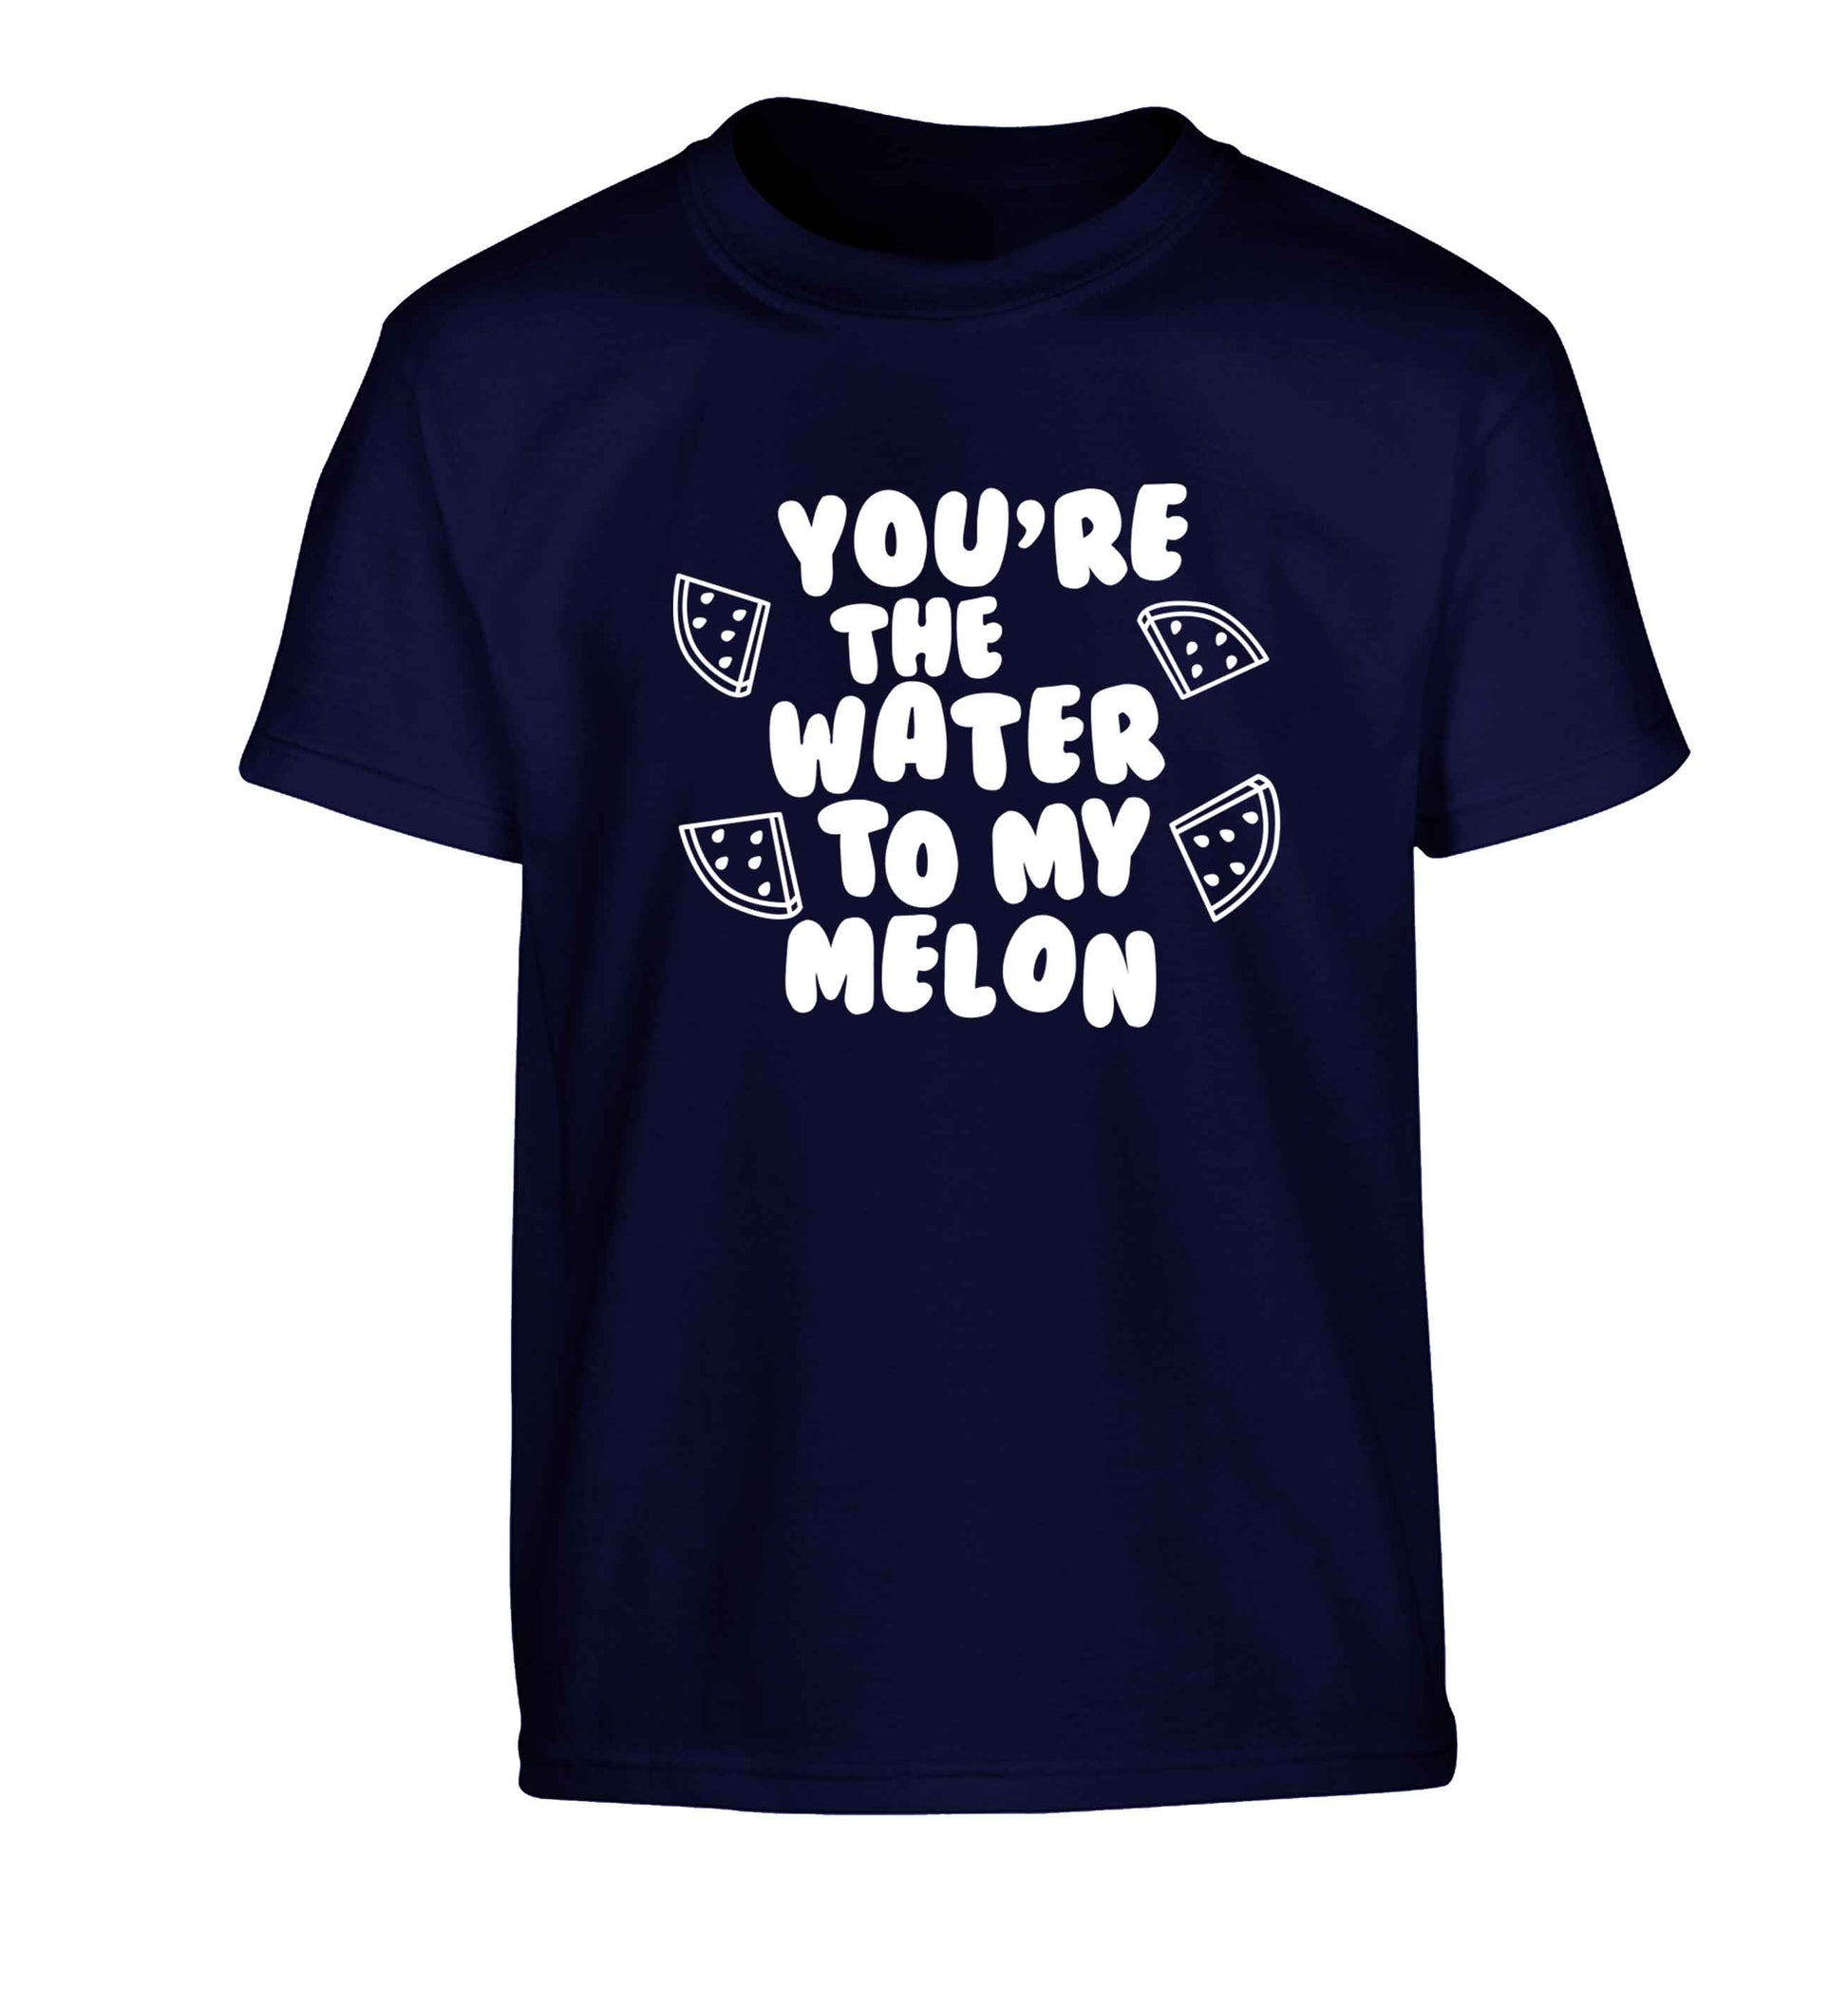 You're the water to my melon Children's navy Tshirt 12-13 Years